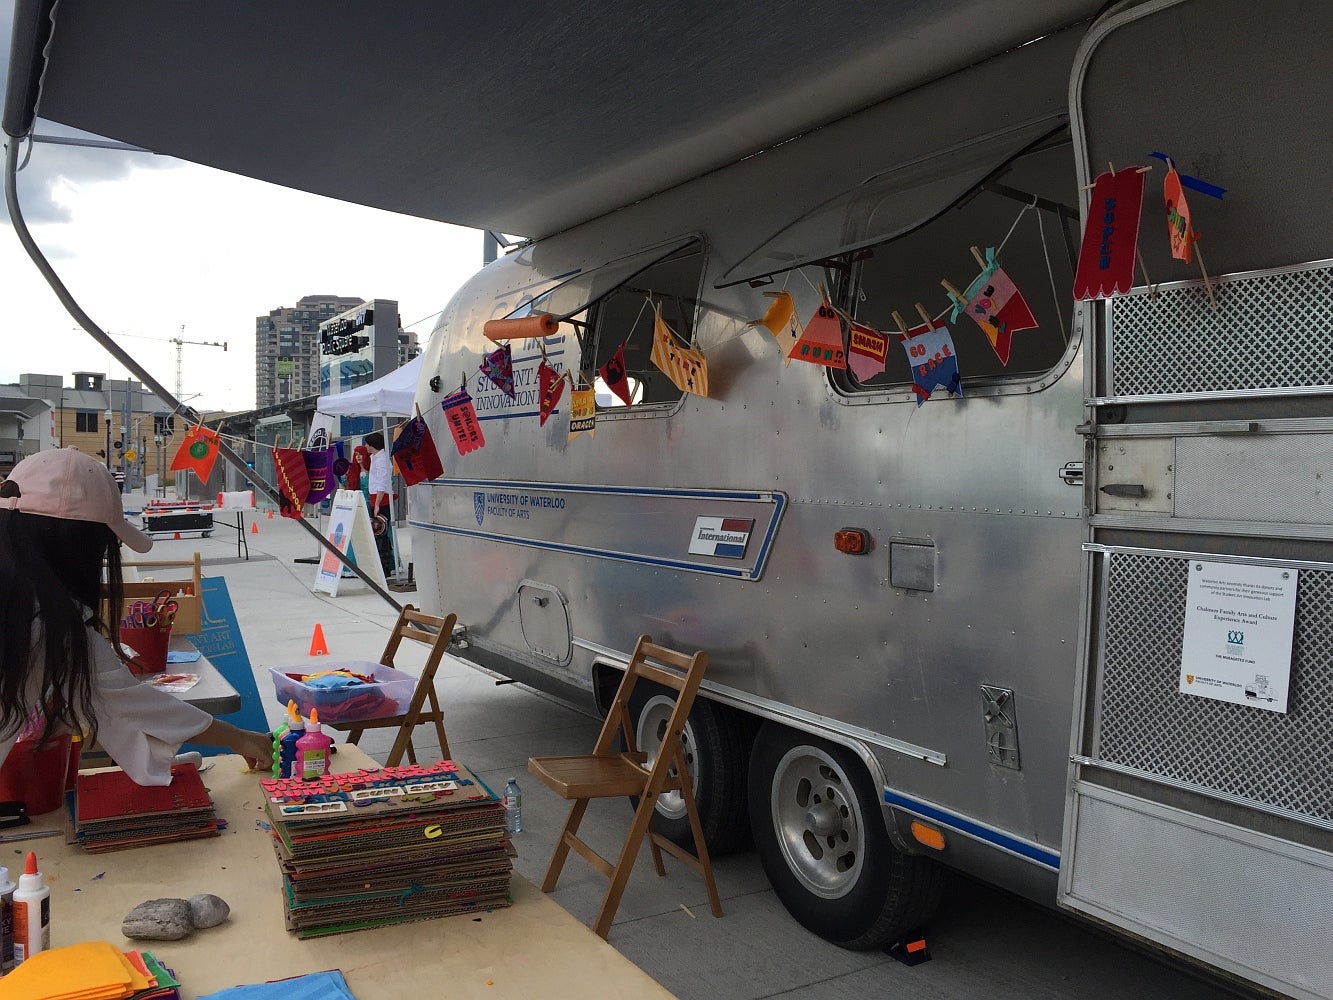 Airstream at Open Streets with flag making